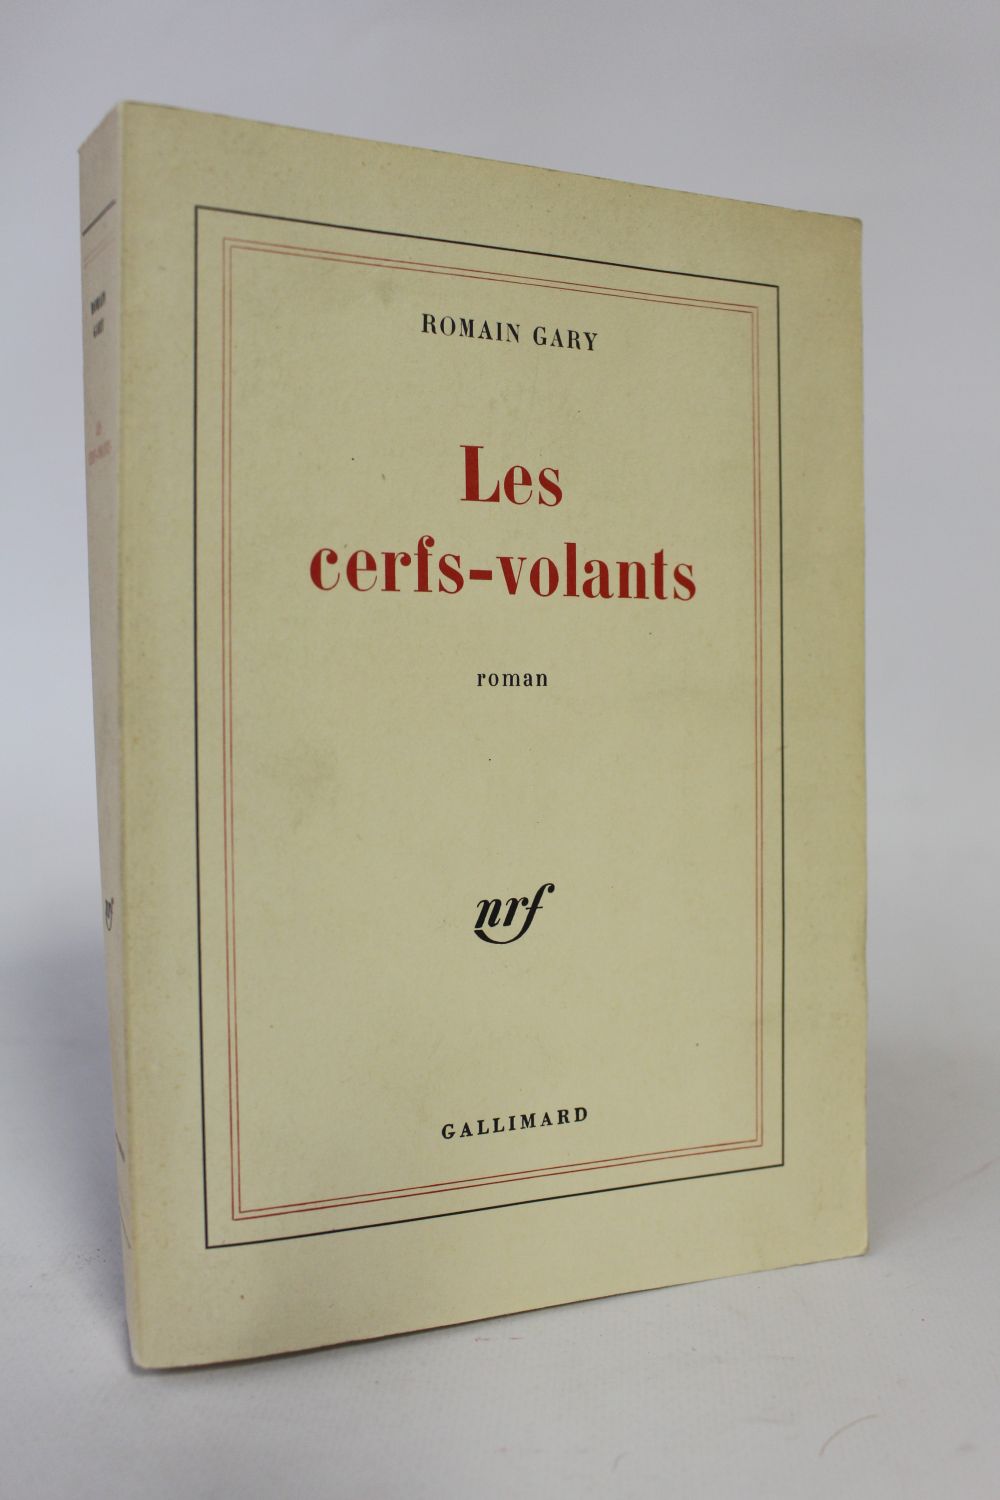 GARY : Les cerfs-volants - Signed book, First edition - Edition